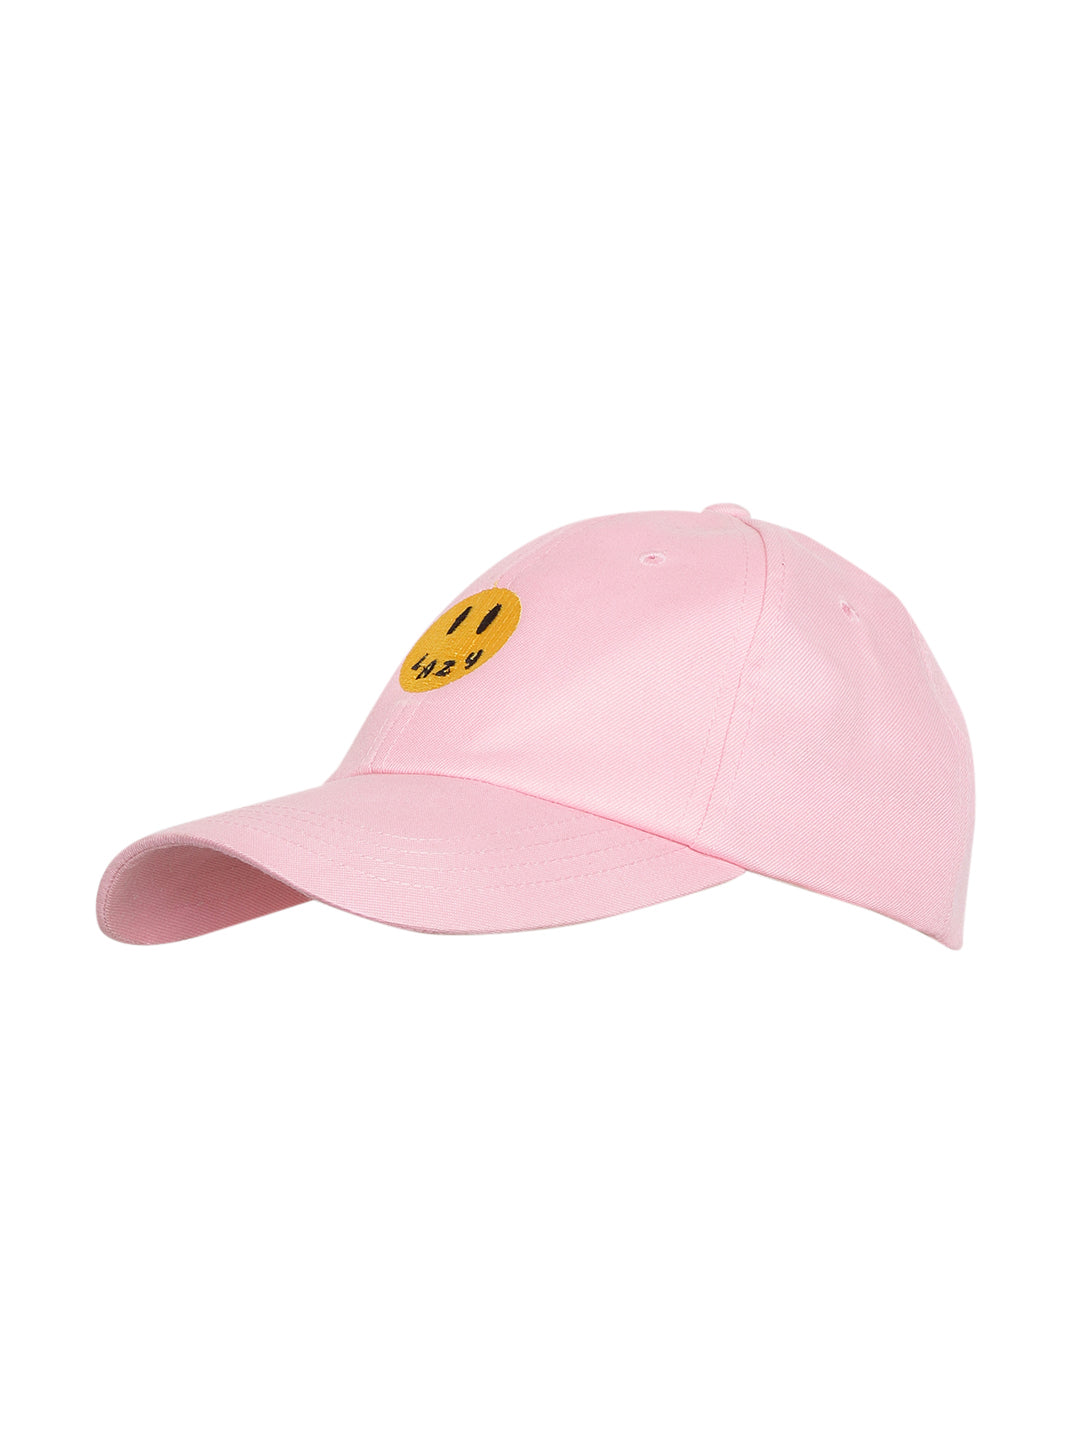 Blueberry pink smile embroidered baseball cap